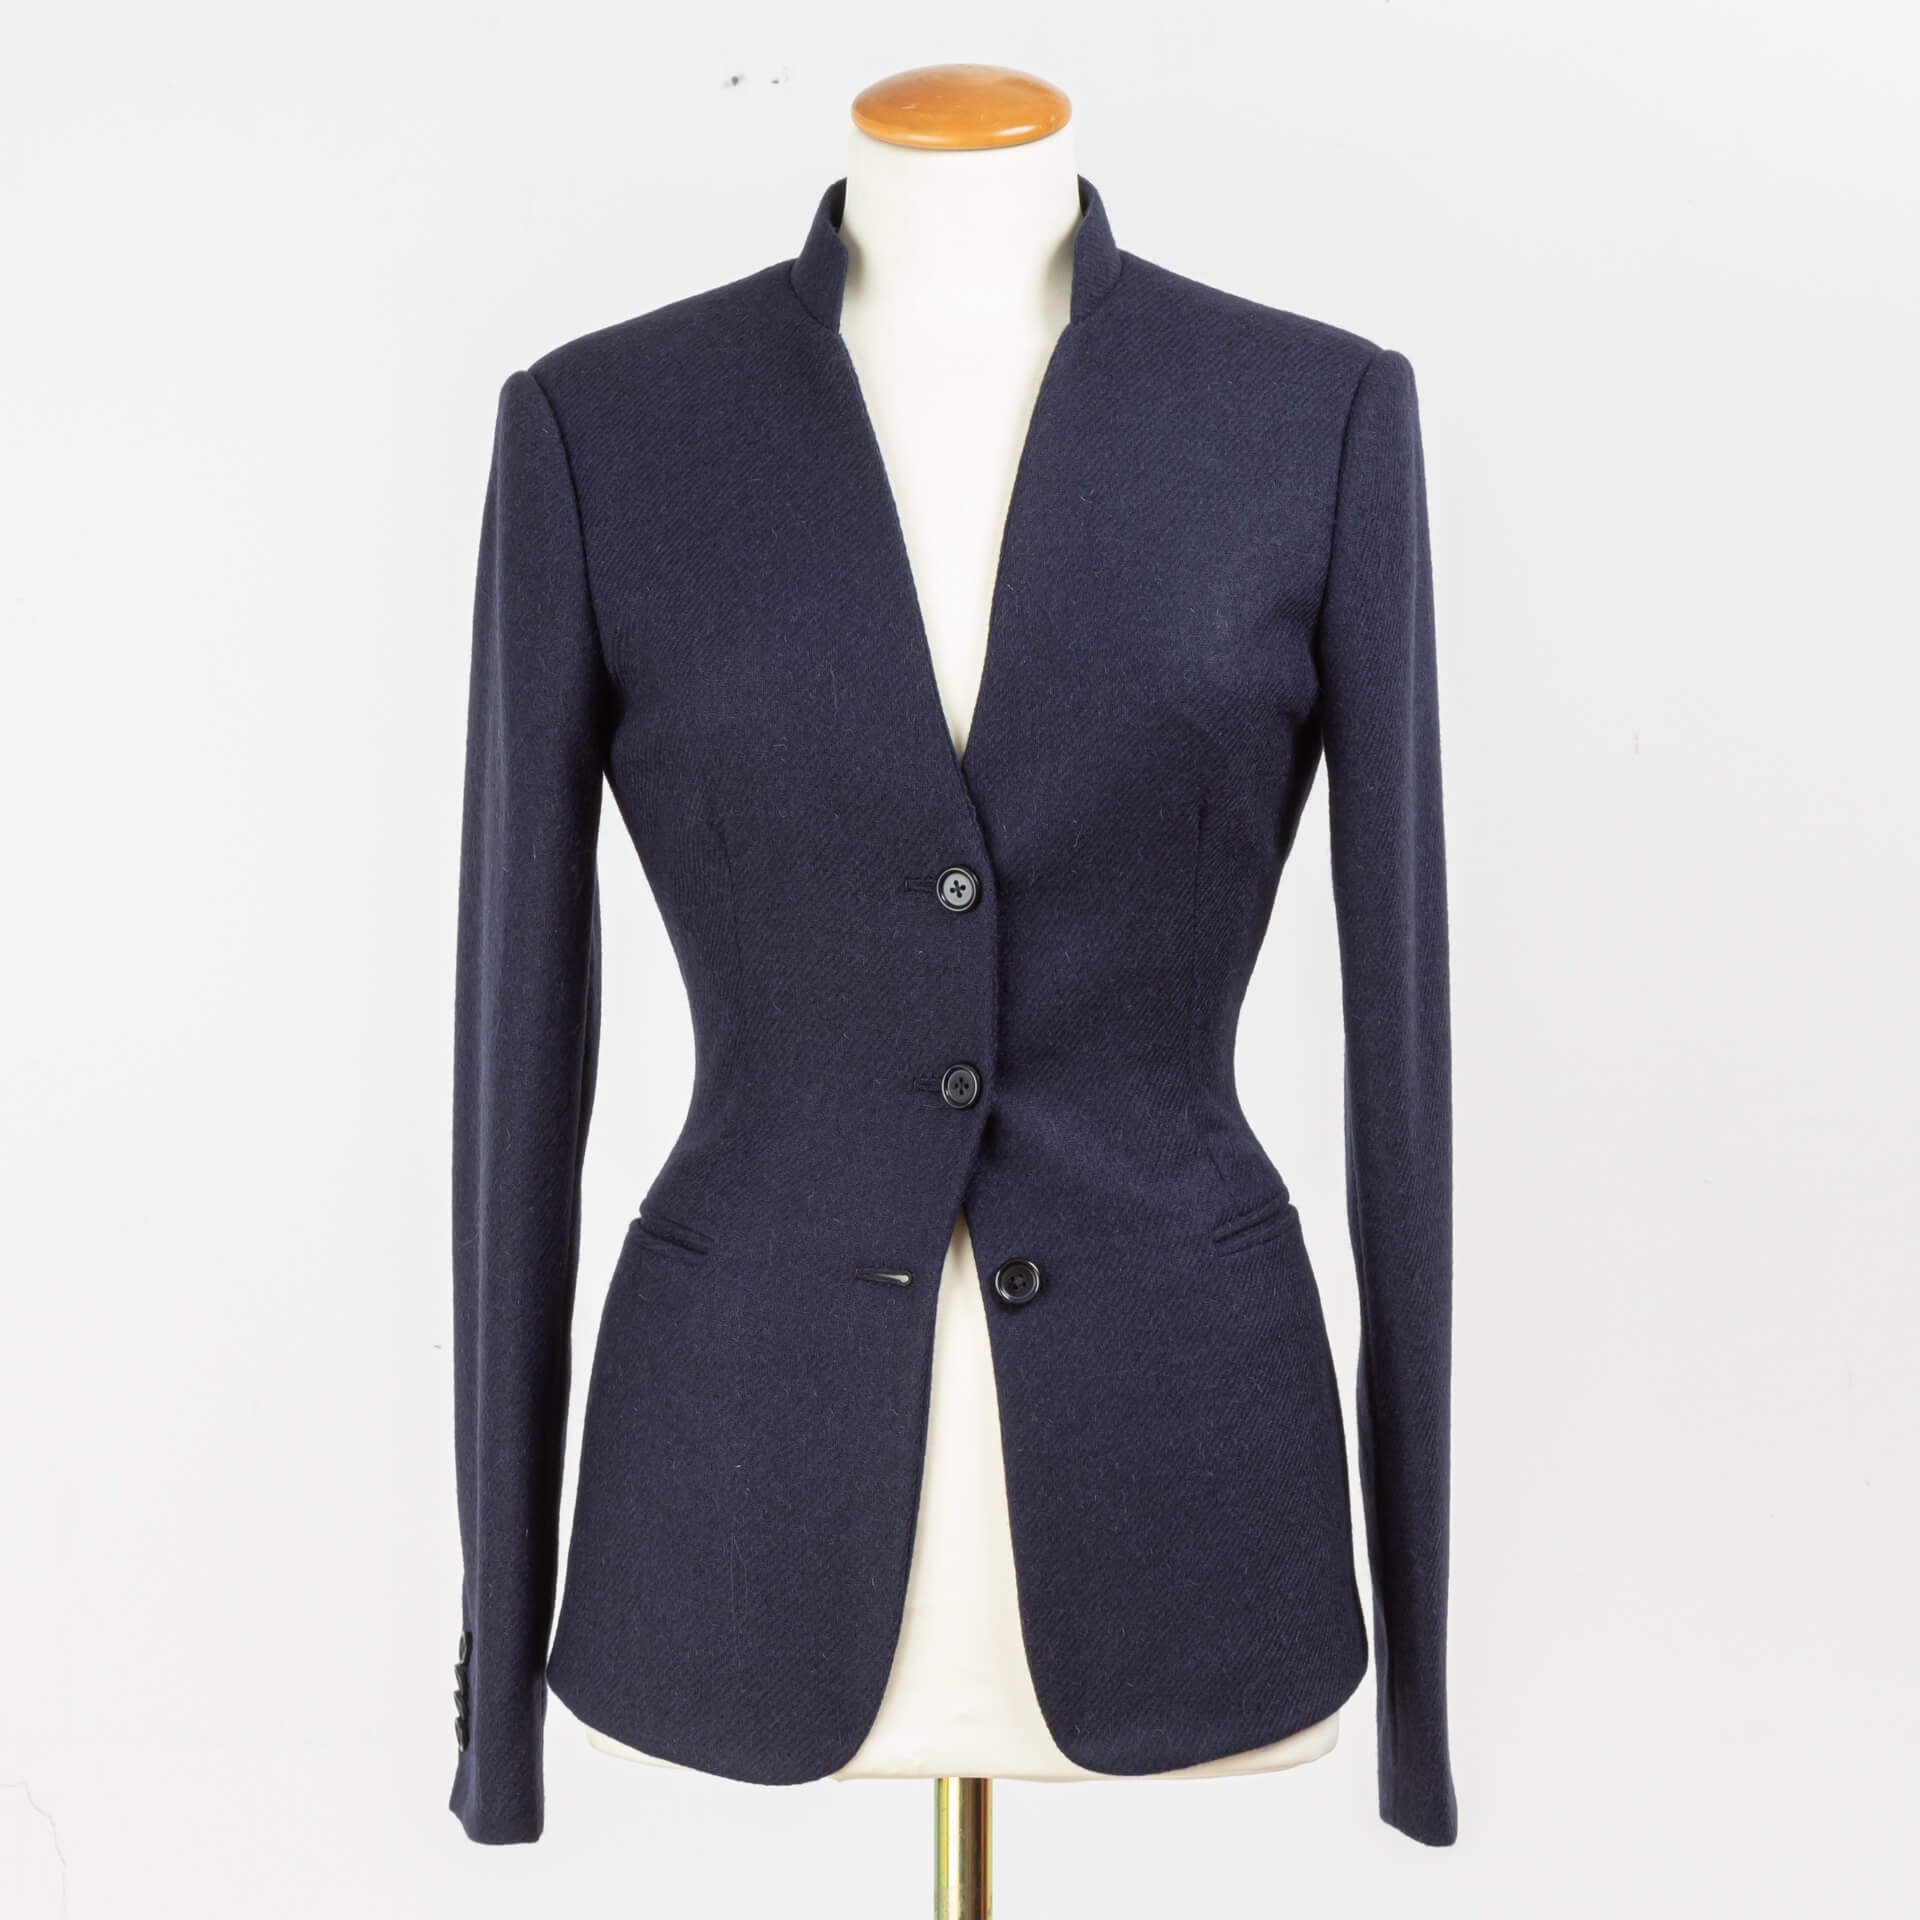 Ladies Jacket with Stand-Up Collar in Navy Tweed